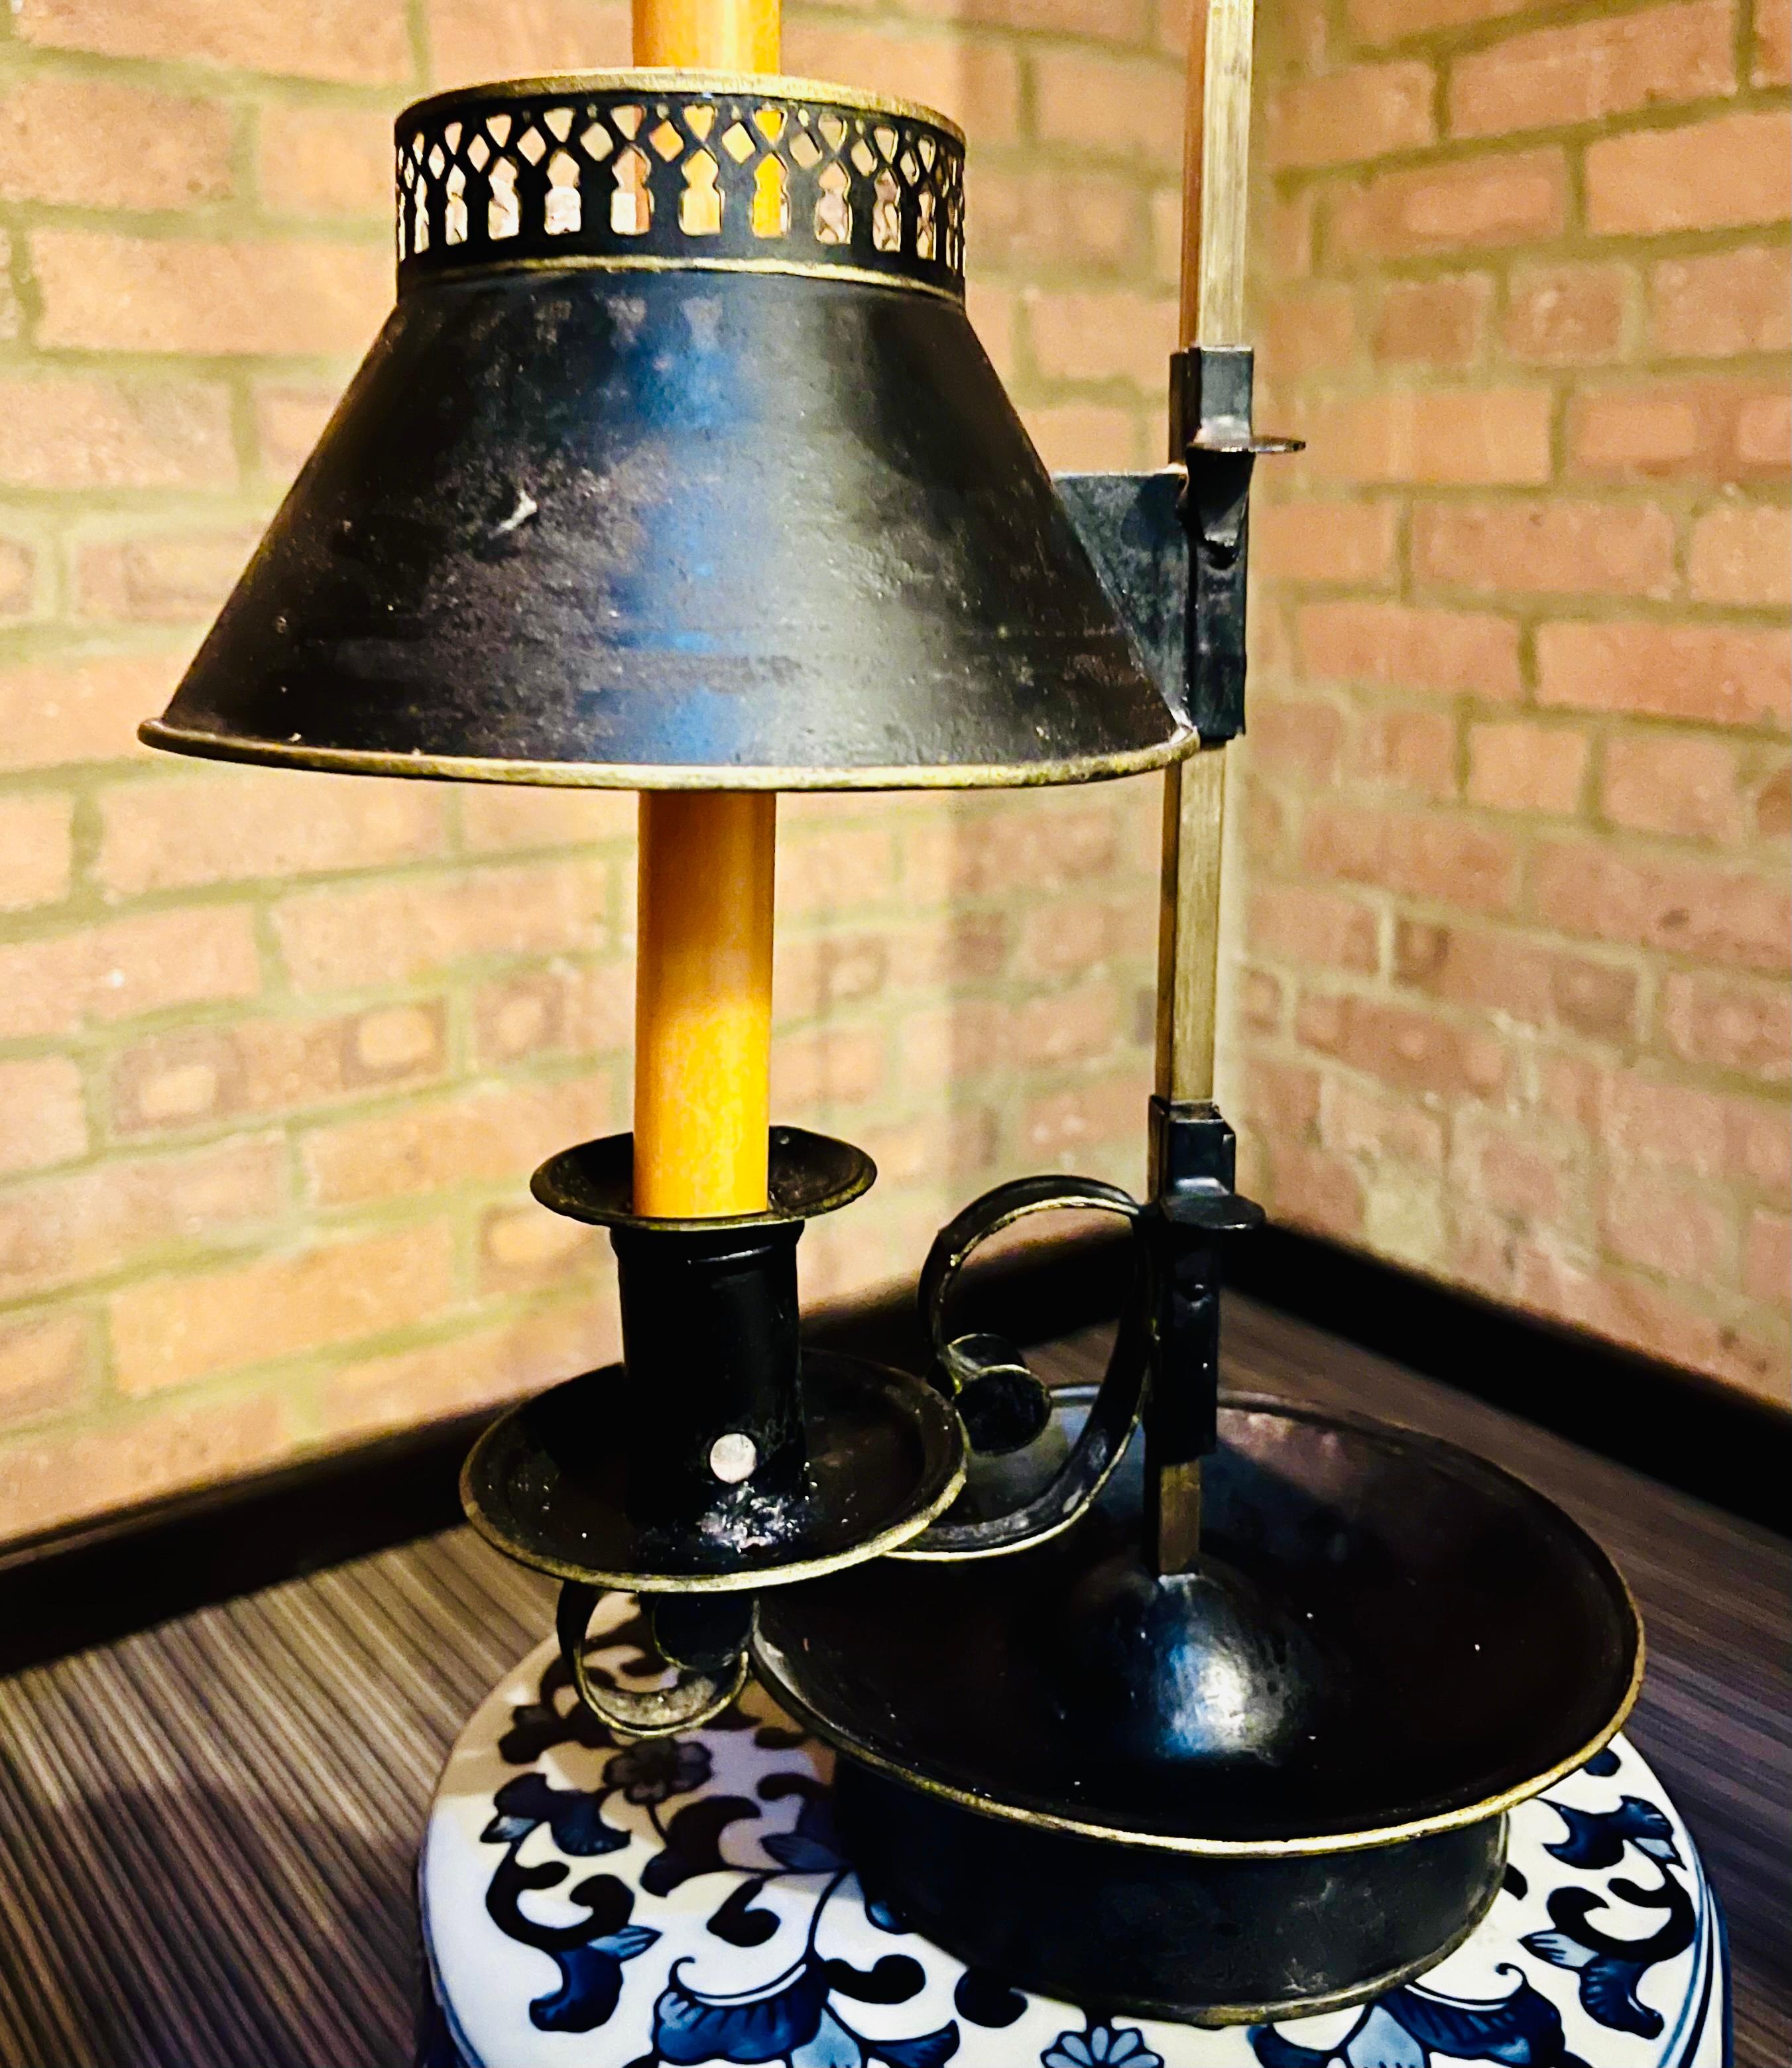 Circa 1820 French 19th Century Regency Period Candlestick Tole Bouillotte Lamp For Sale 6